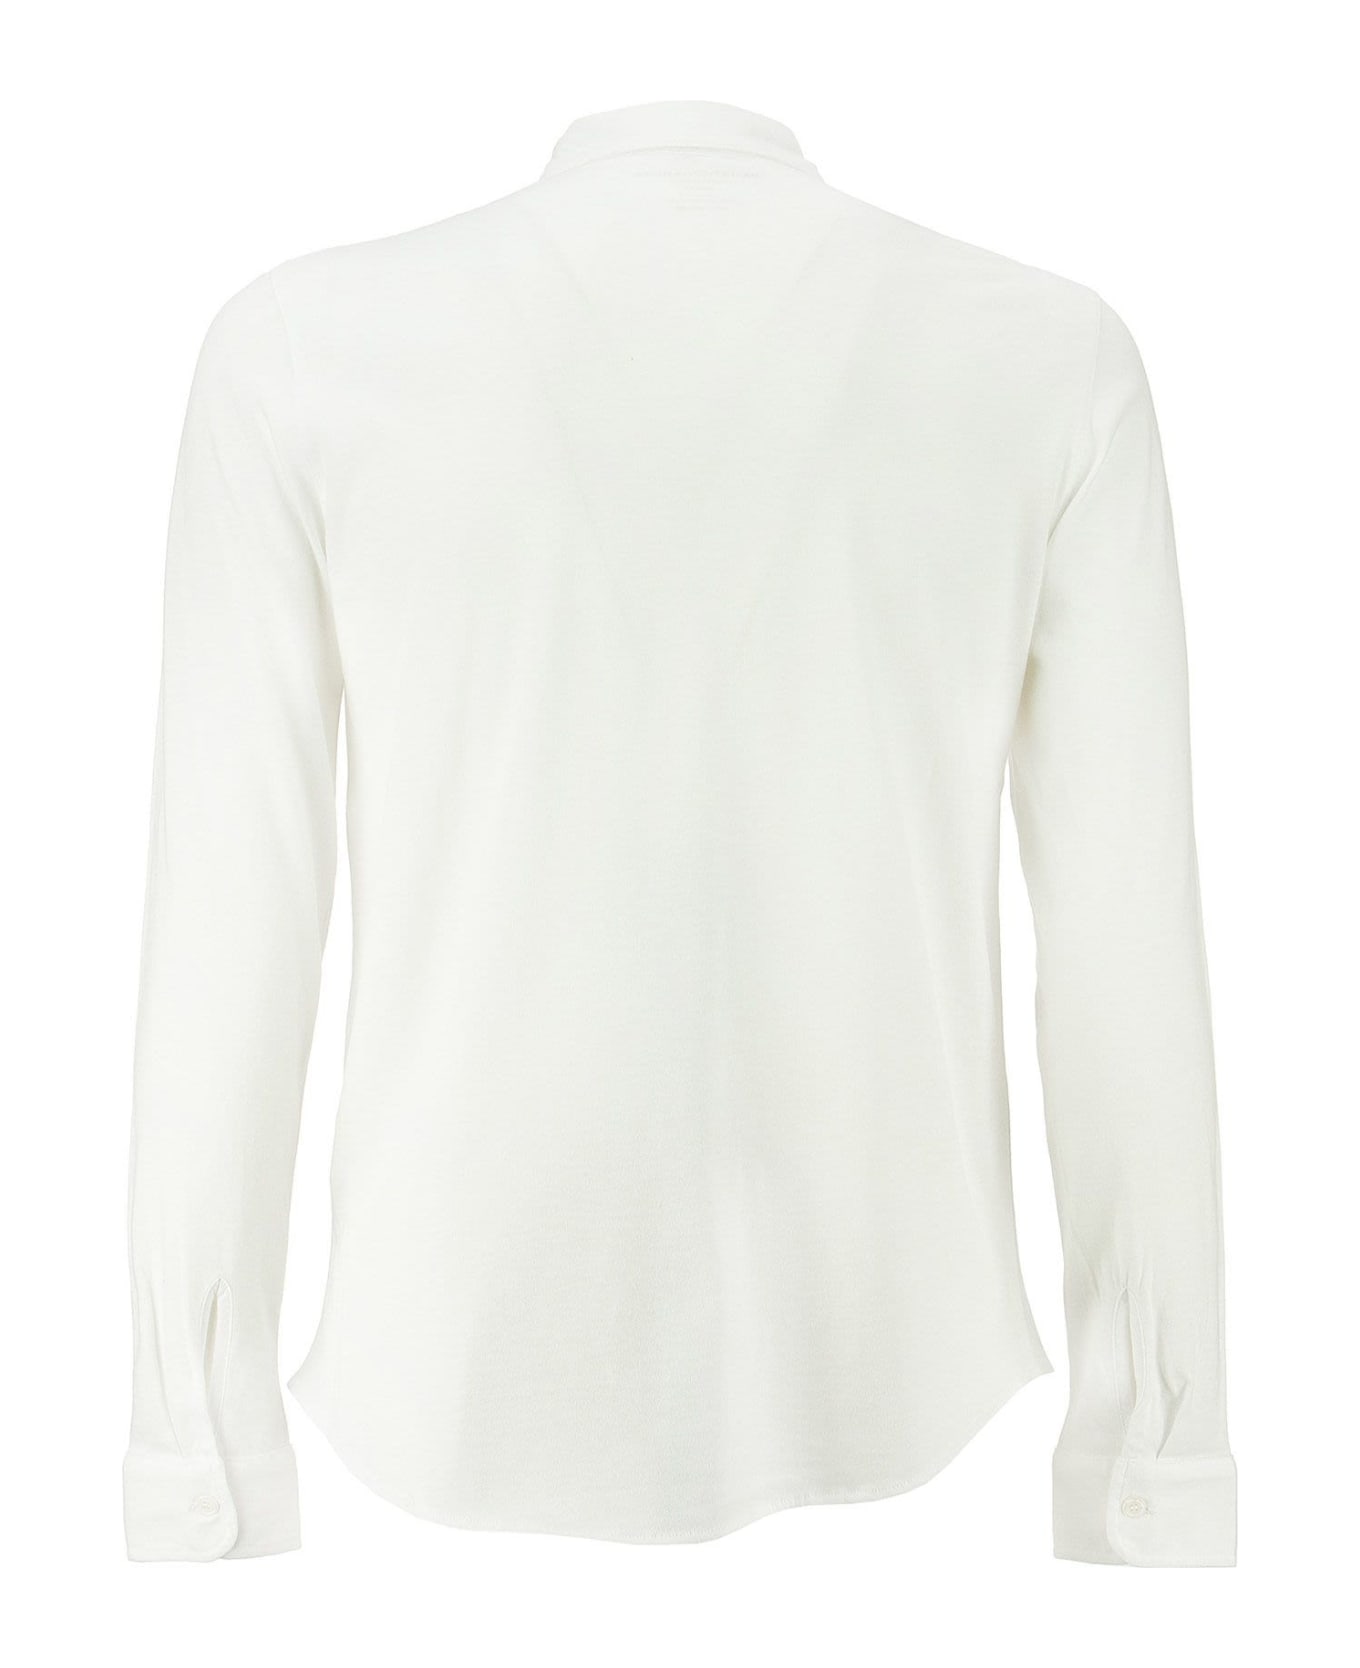 Majestic Filatures Deluxe Cotton Long Sleeve Shirt - White シャツ